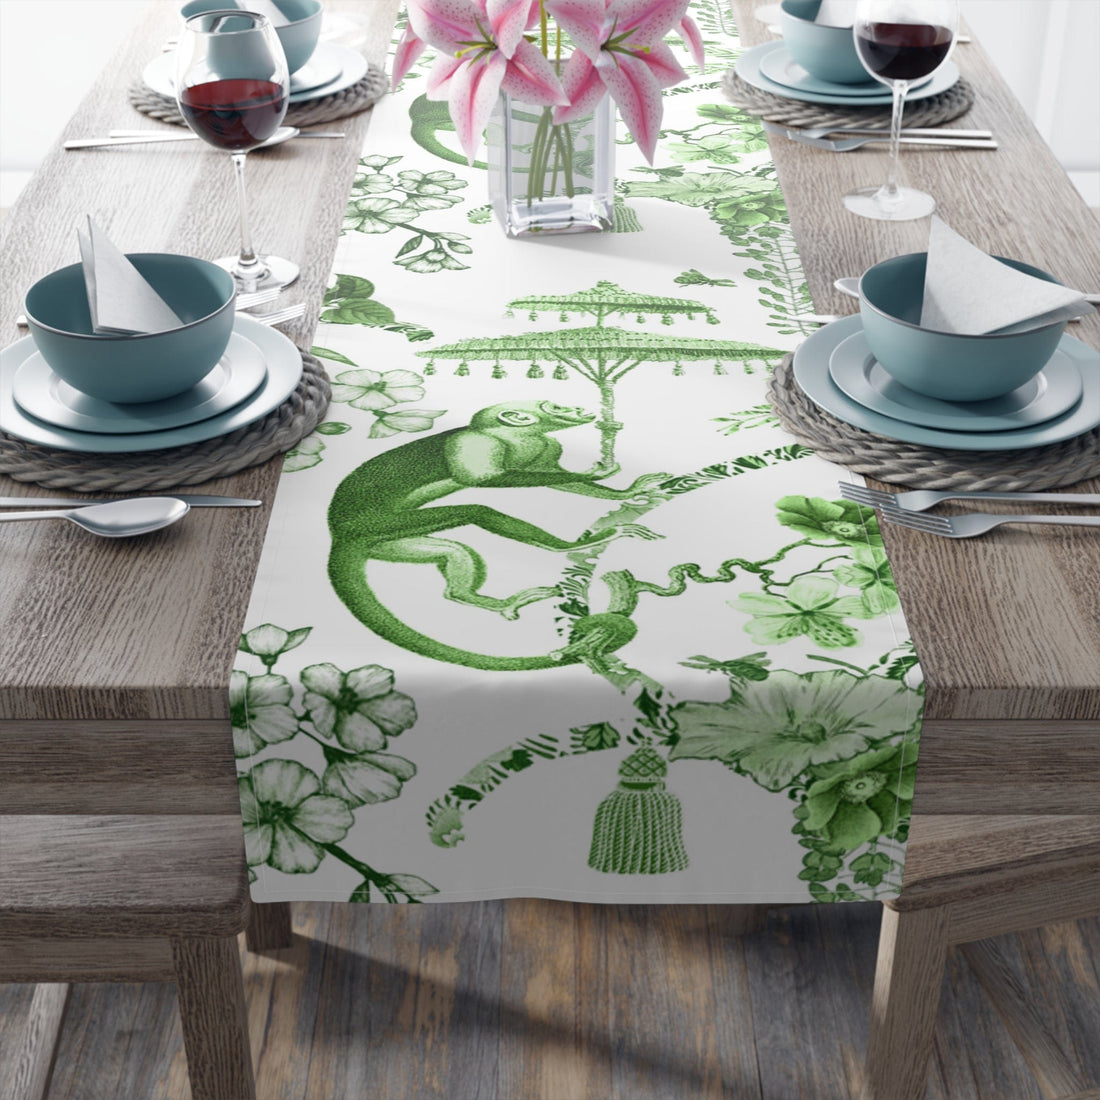 Printify Chinoiserie Botanical Toile Table Runner, Floral Green, White Chinoiserie Jungle, Country Farmhouse Grandmillenial Table Decor Home Decor 16&quot; × 90&quot; / Cotton Twill 33300911032699350133